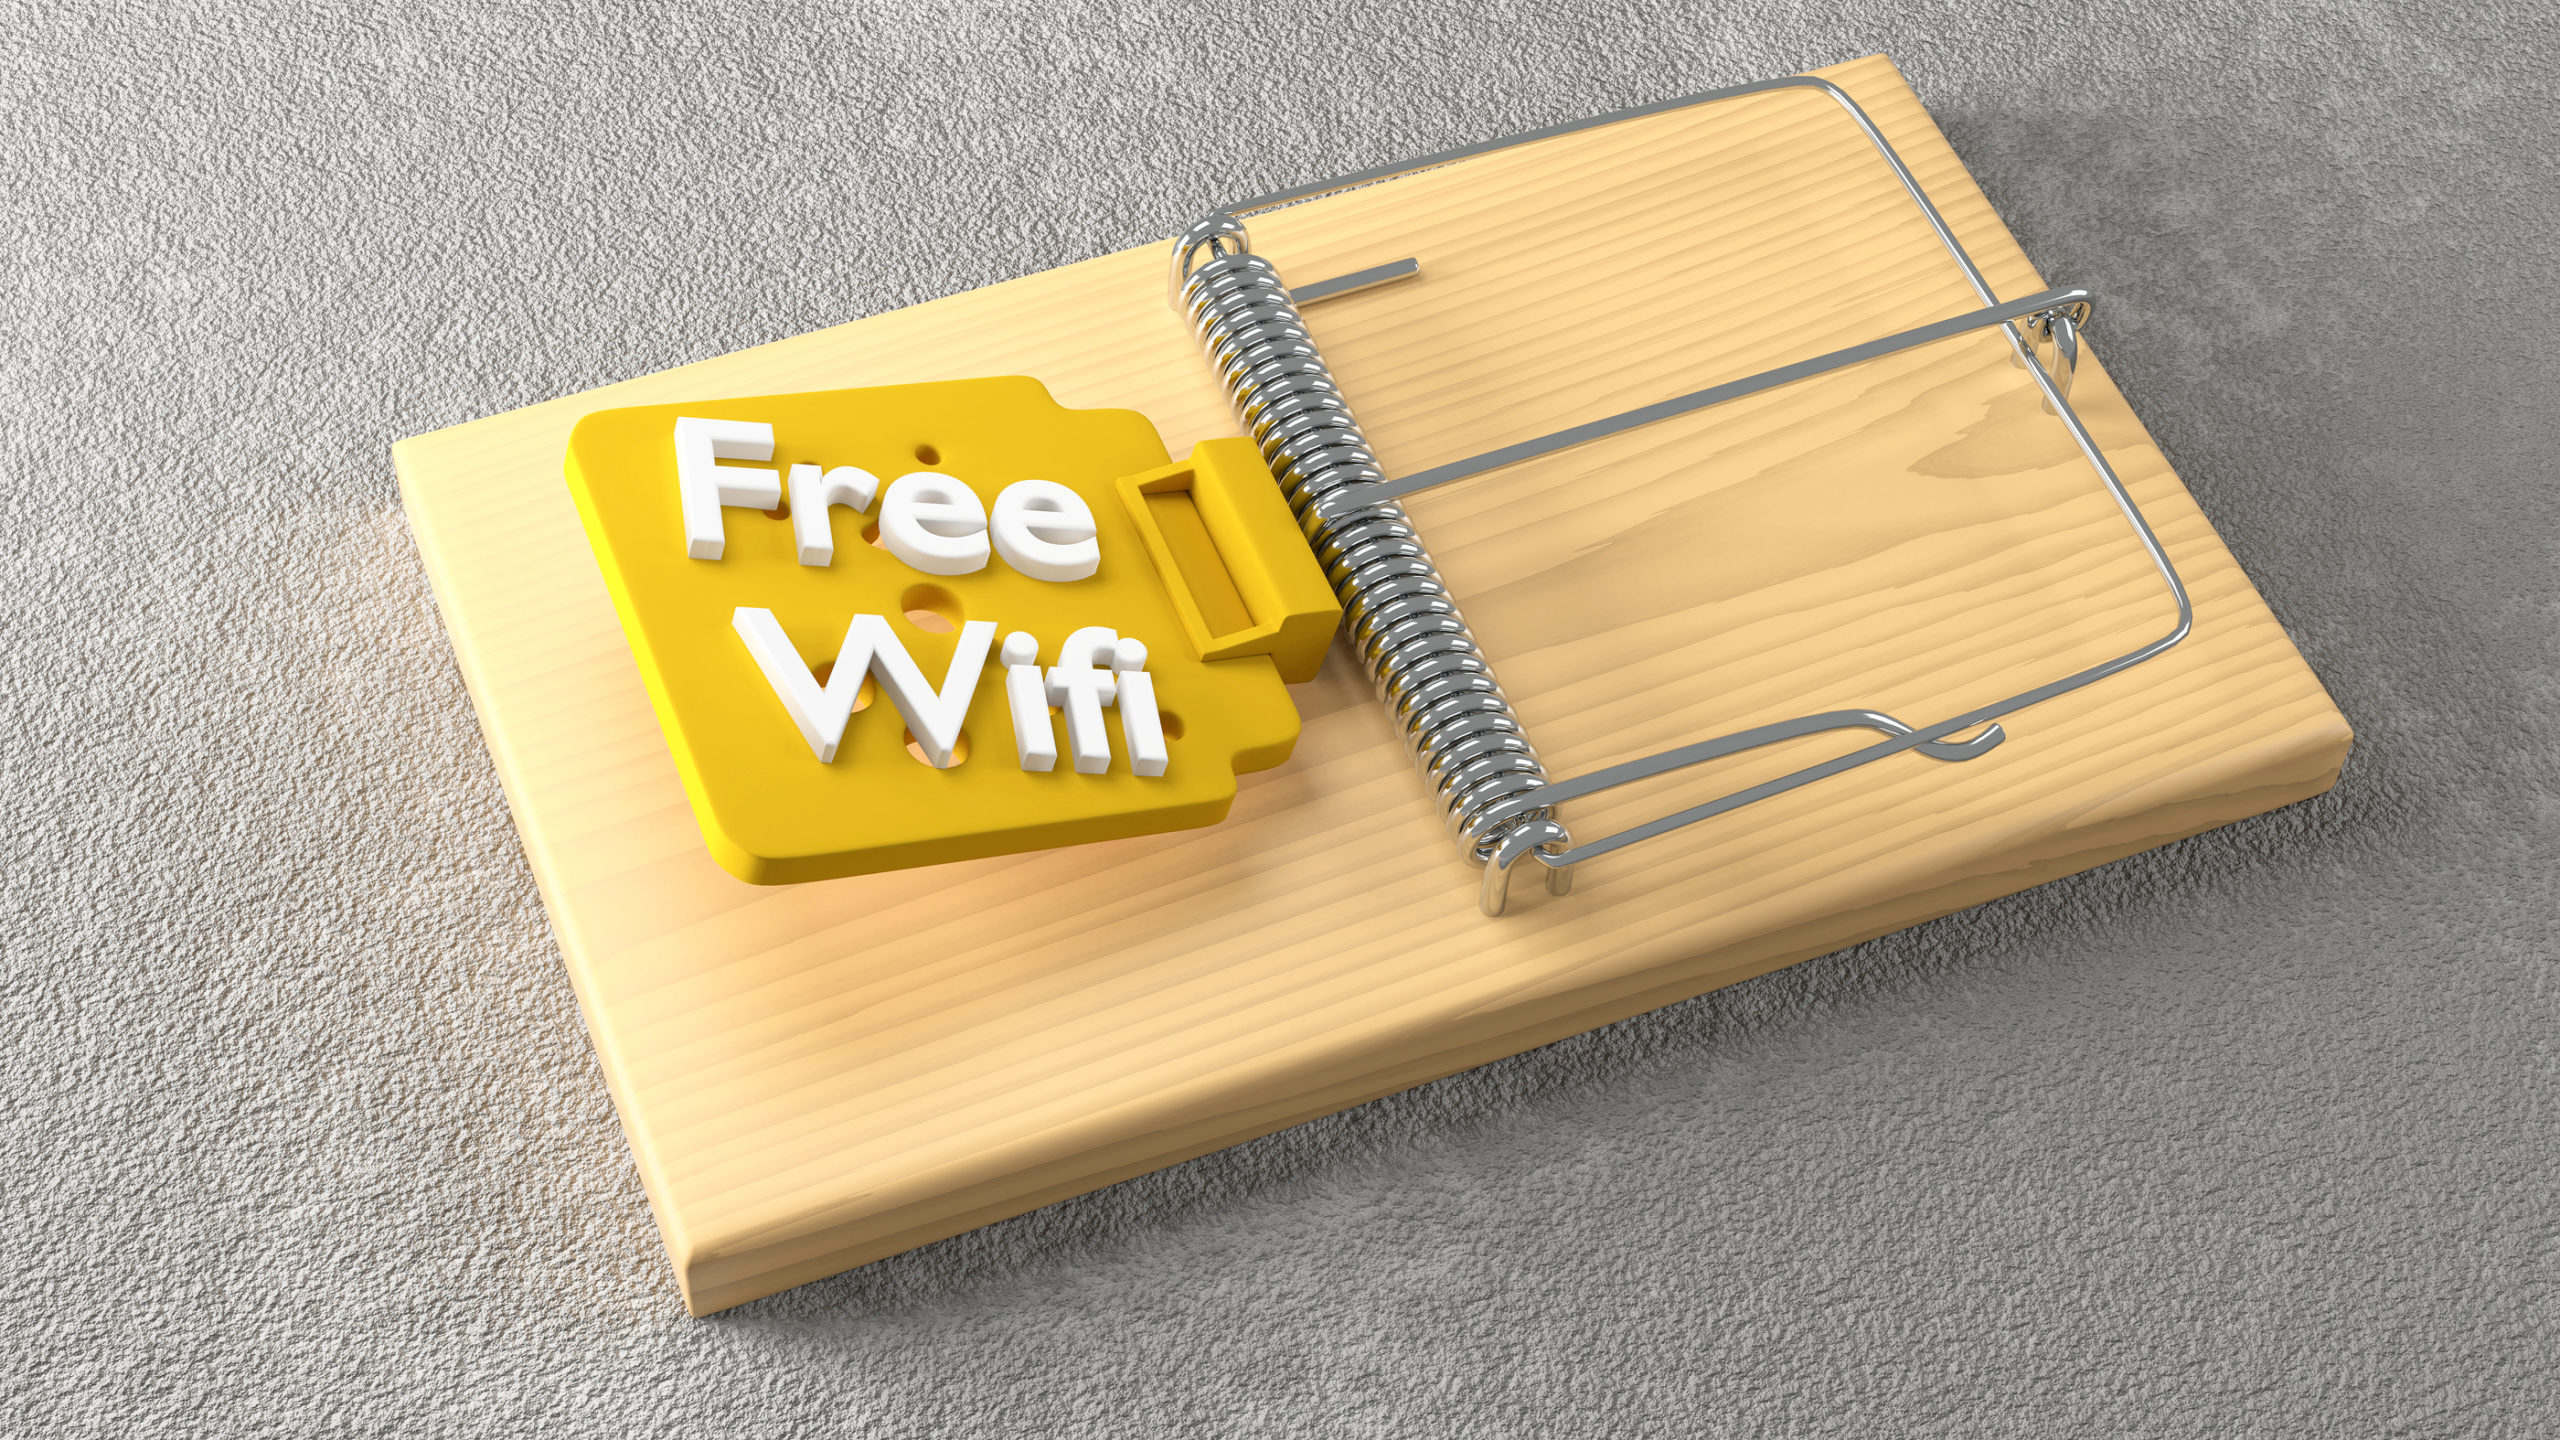 The 4 Biggest Risks of Public Wi-Fi and How to Avoid Them